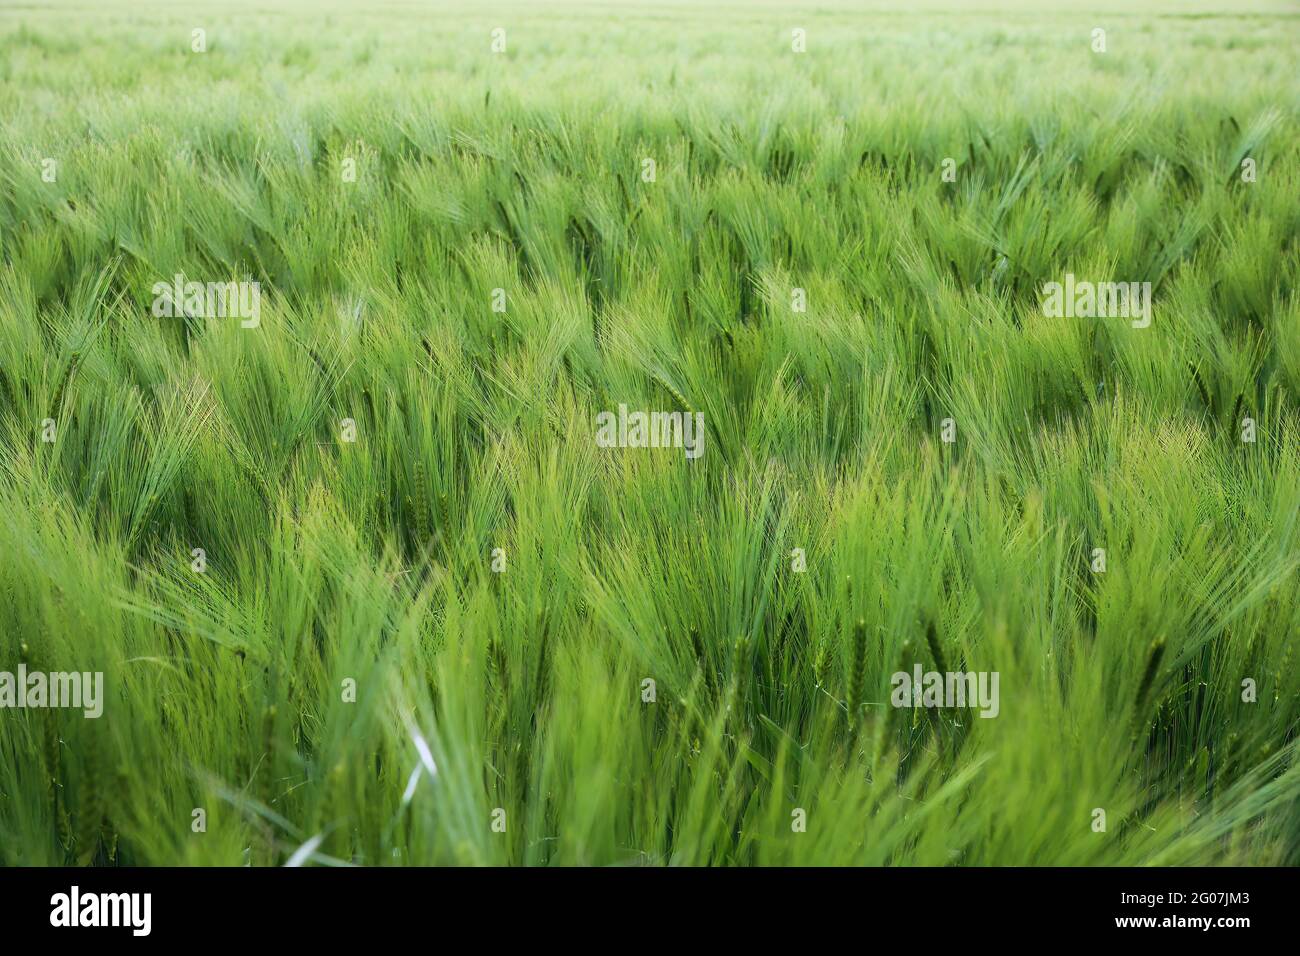 Full frame view on field with young green common wheat (triticum aestivum) Stock Photo